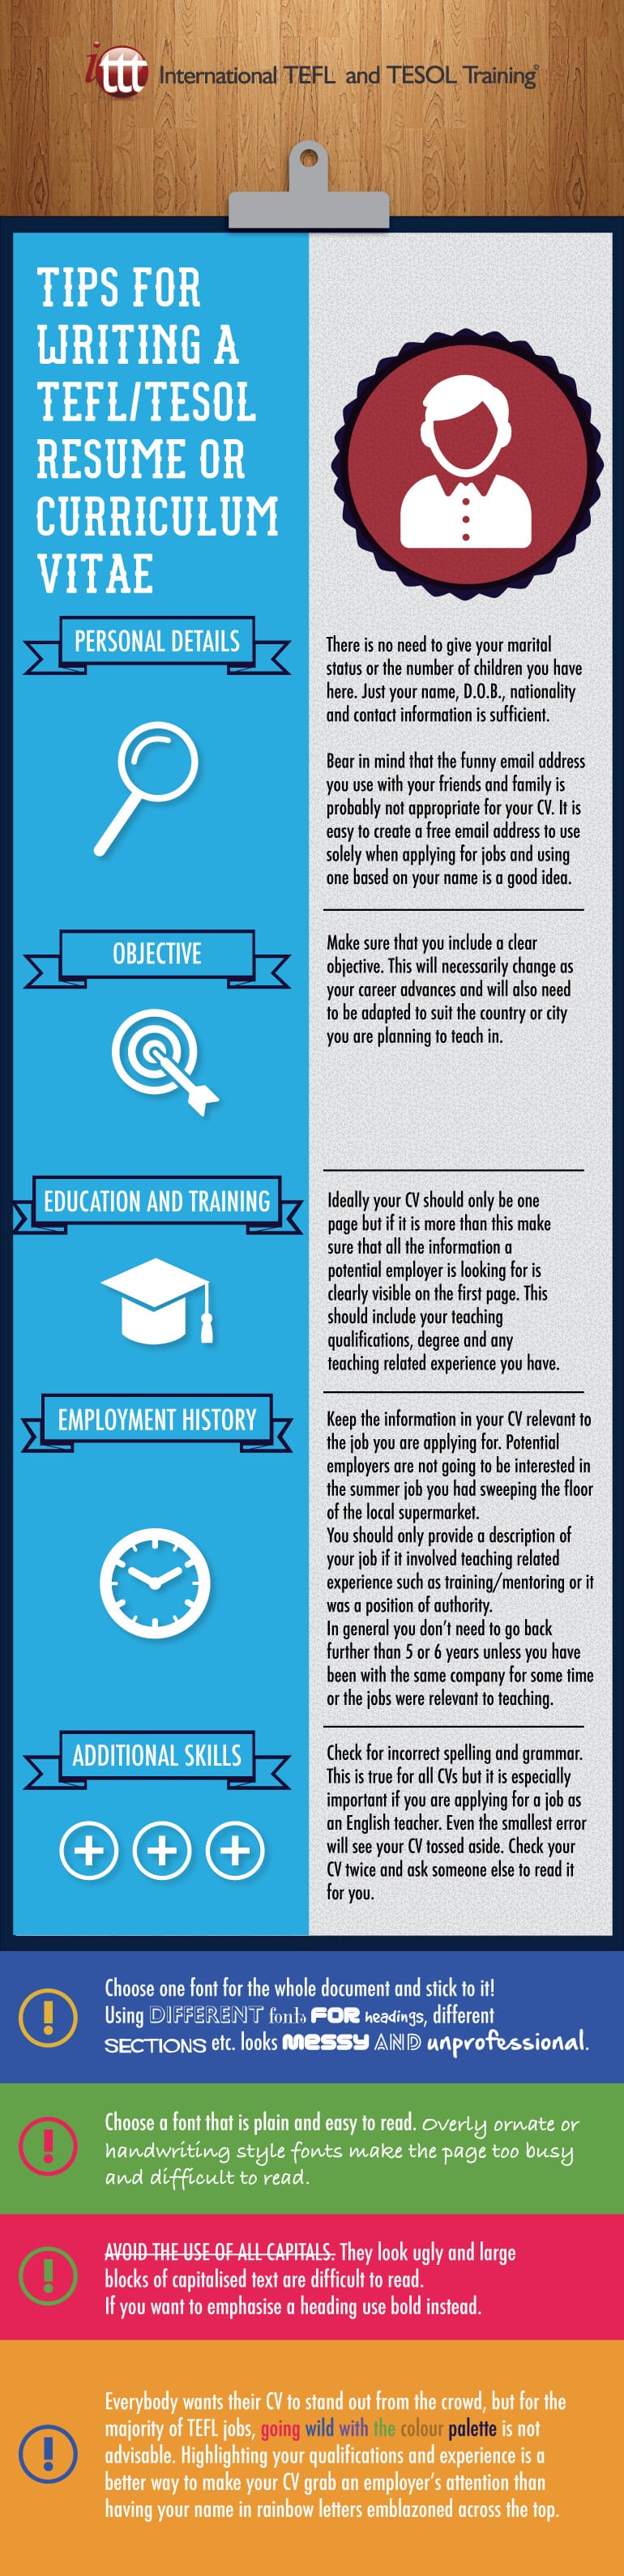 Infographic Tips for writing a TEFL/TESOL Resume/ Curriculum Vitae